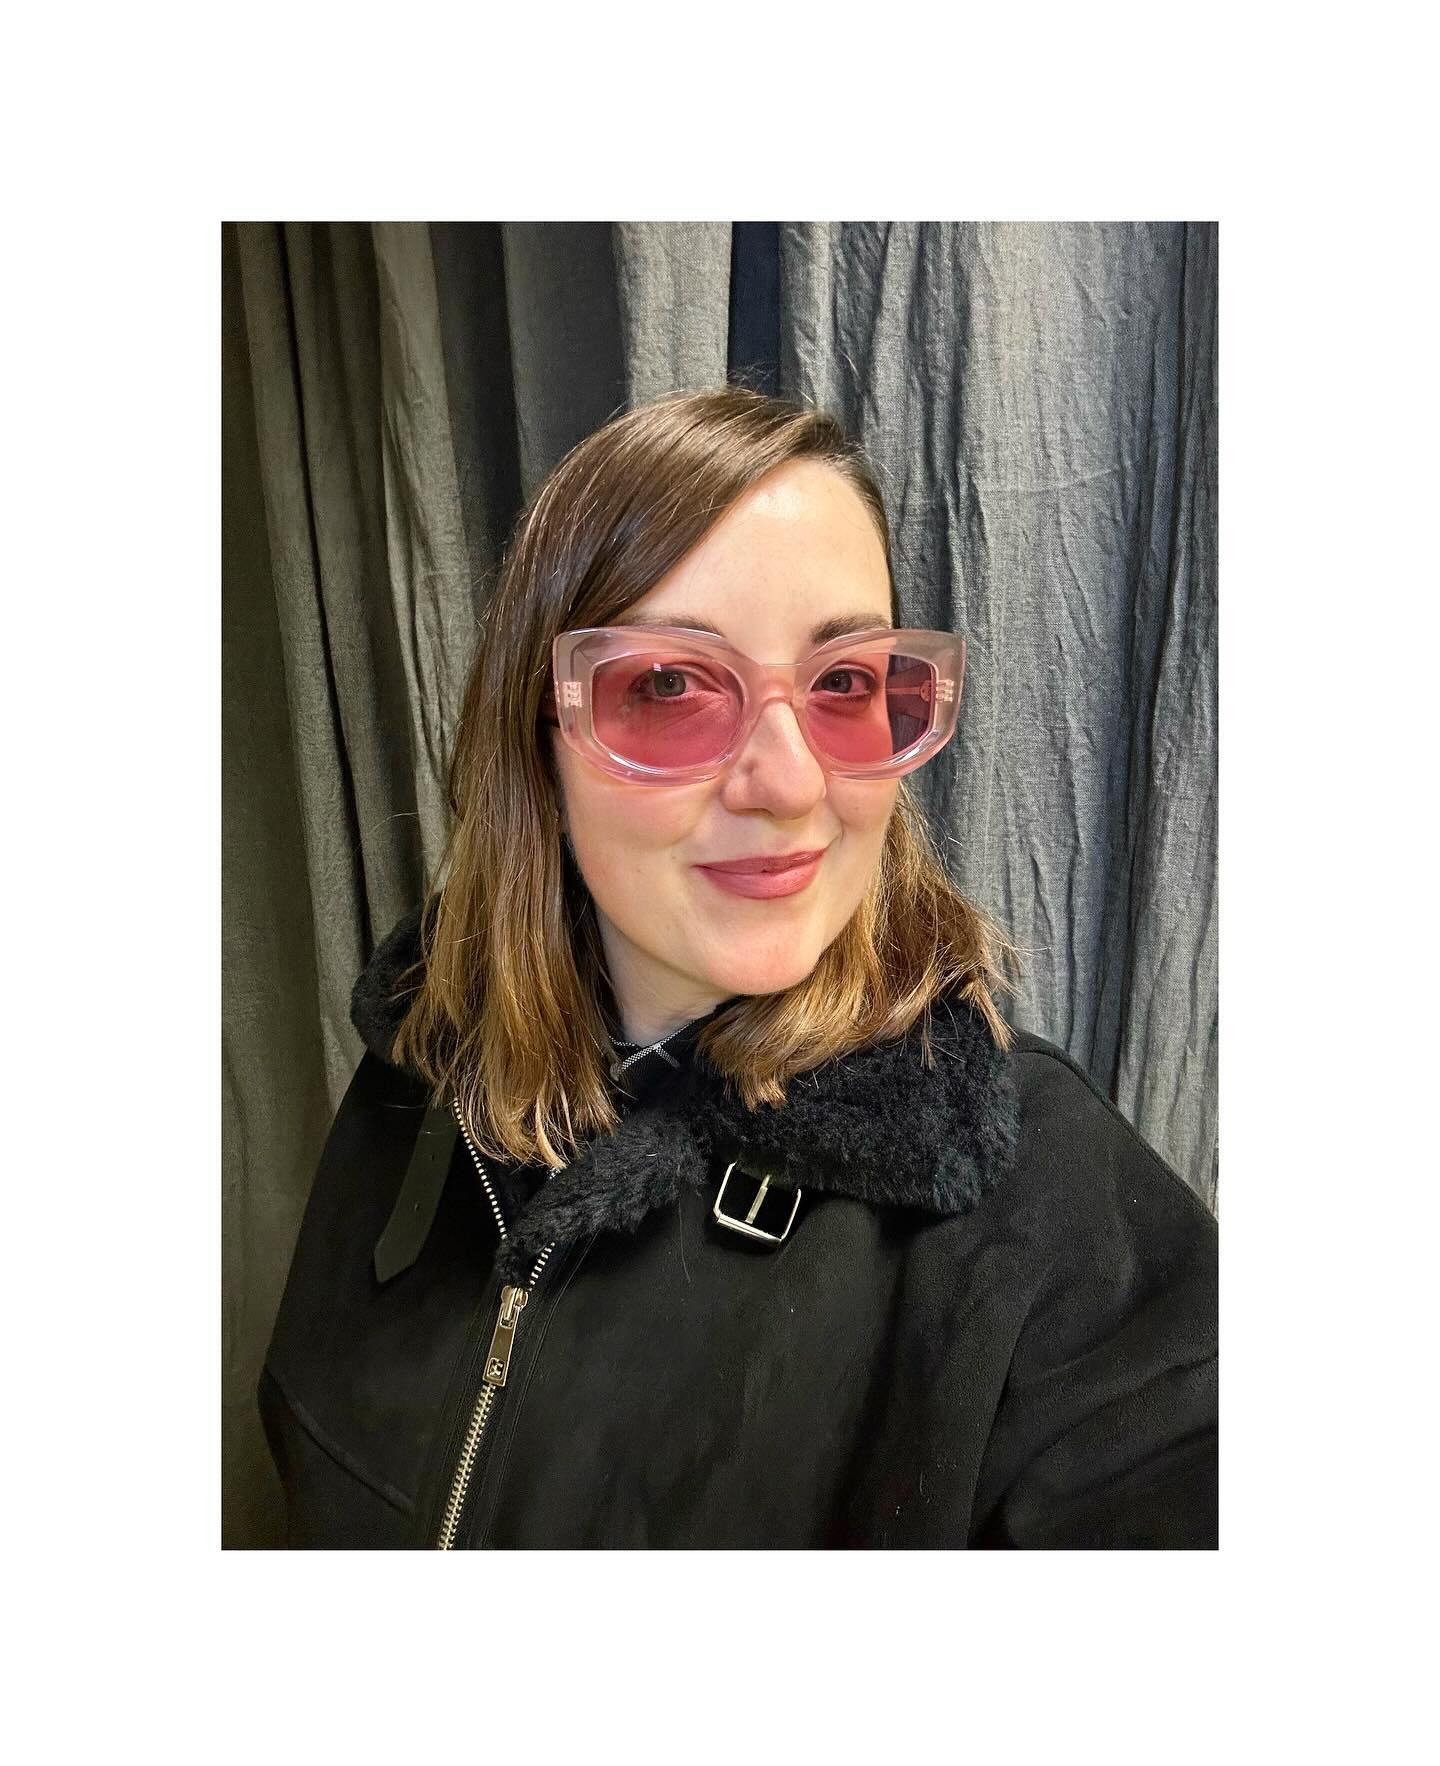 My new @celine Rx&rsquo;d glasses promoted a &lsquo;Bran Van 3000?!&rsquo; reference by someone I recently showed them to, so I guess I&rsquo;m embracing the 1990s trend more than I thought&hellip;.. This tint is darker than I normally wear but so co